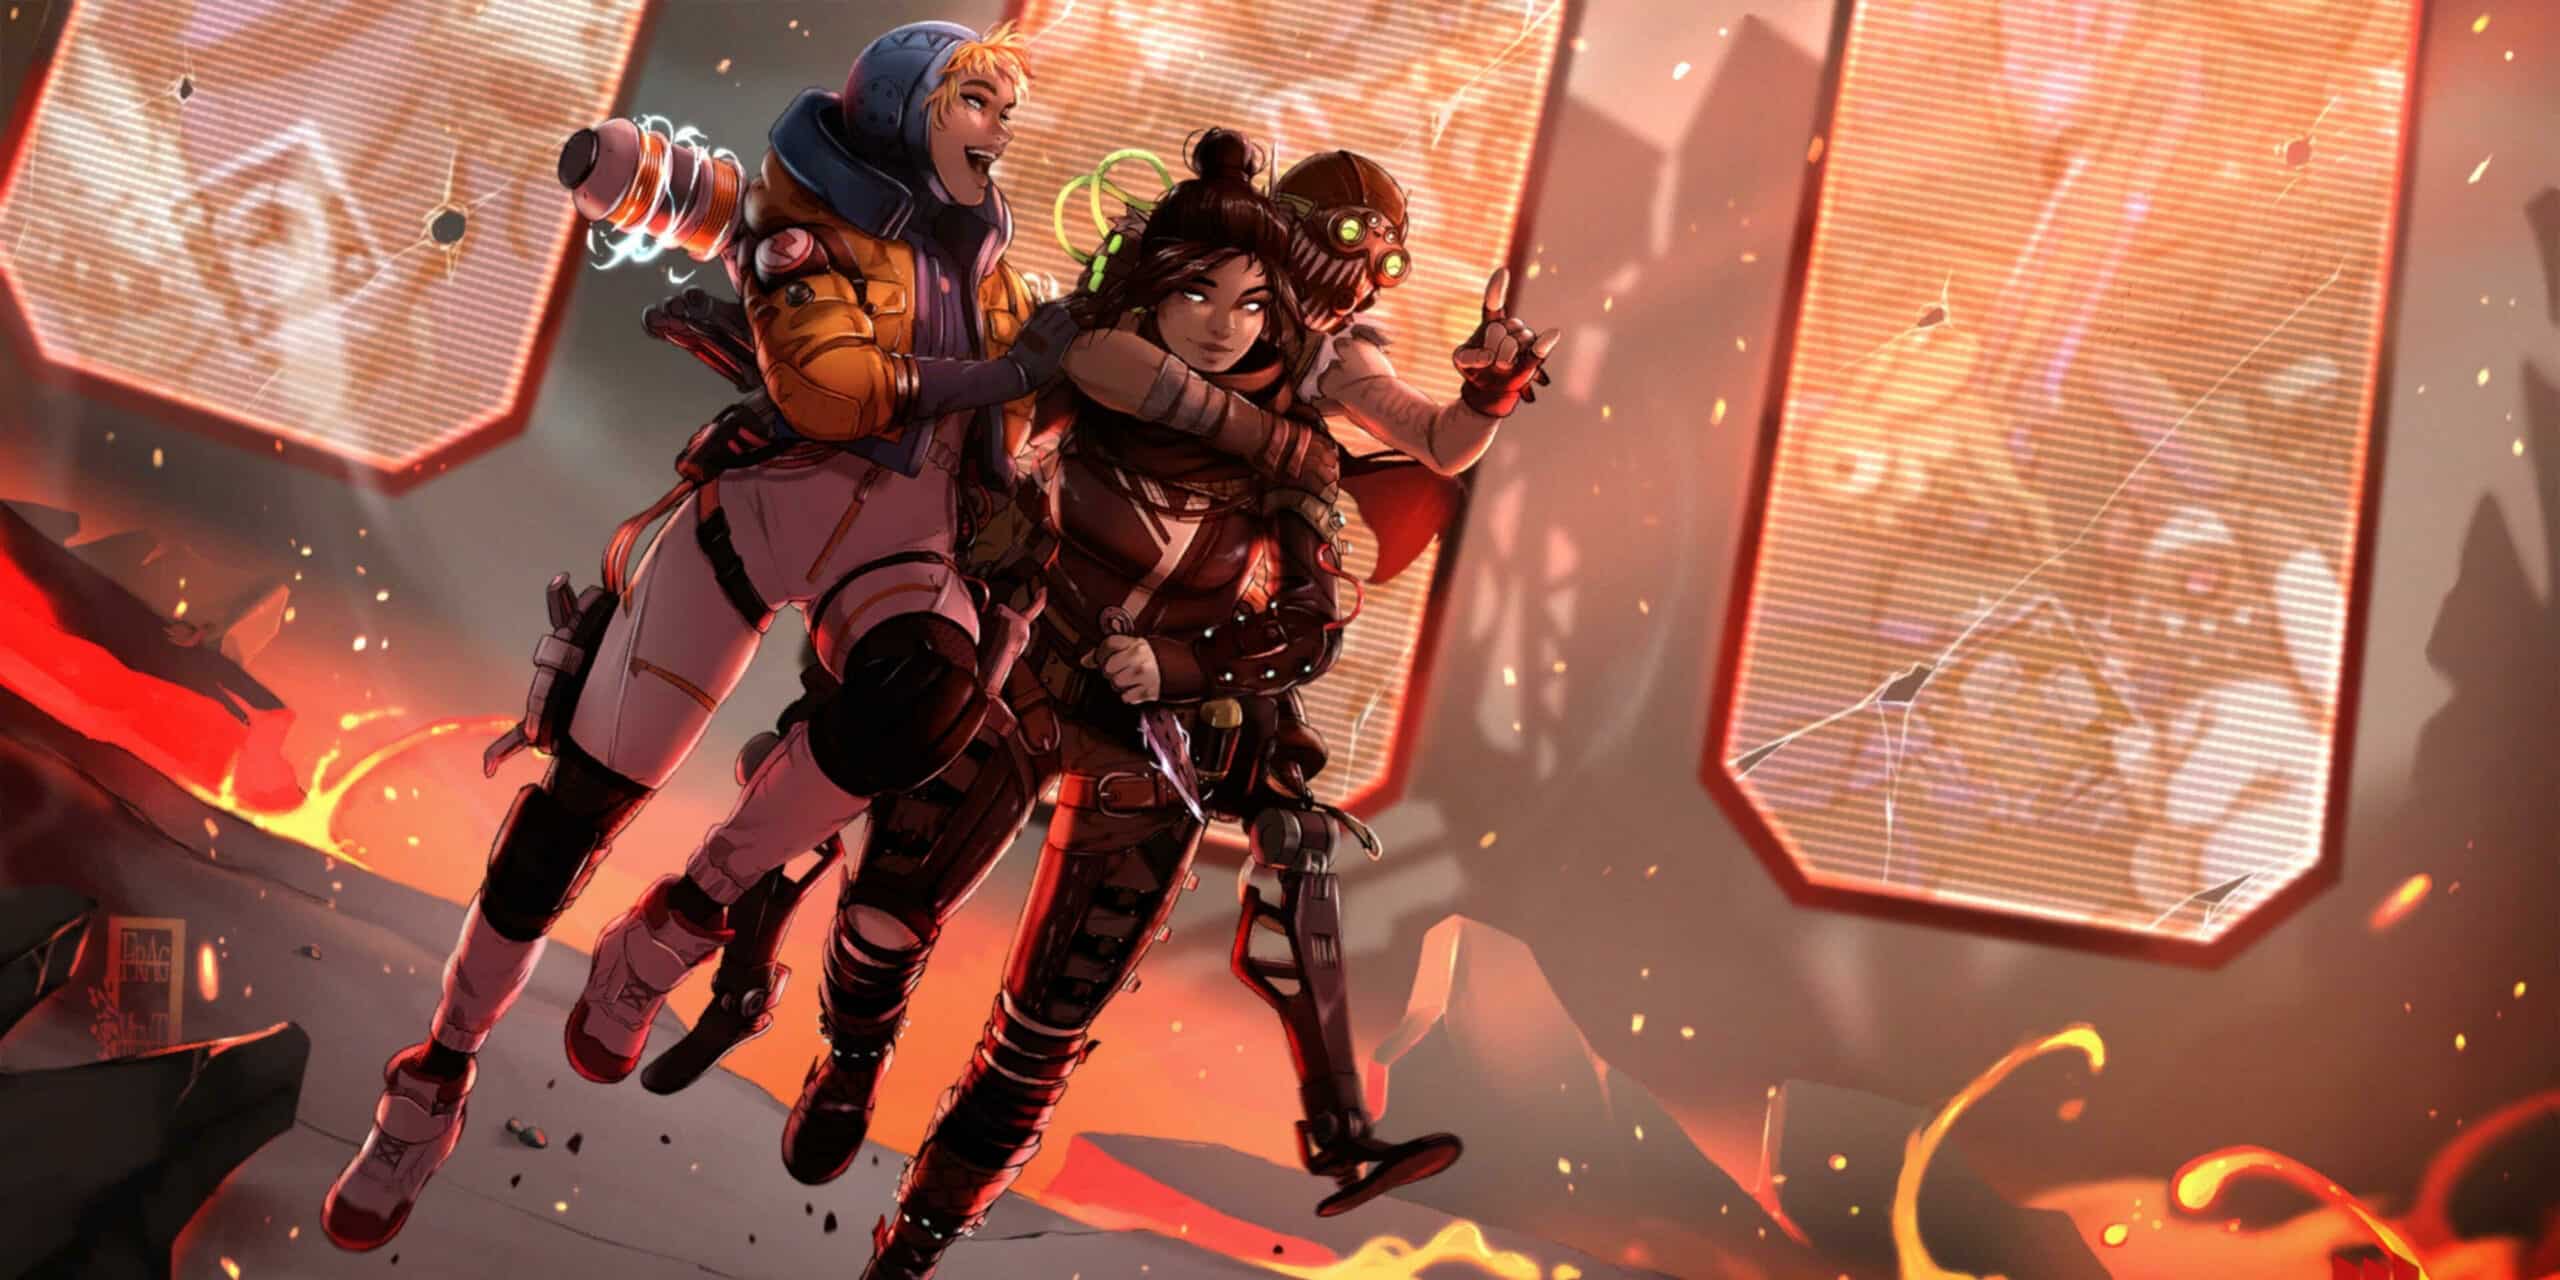 Apex Legends Mobile has been added to the Play Store. It's not yet